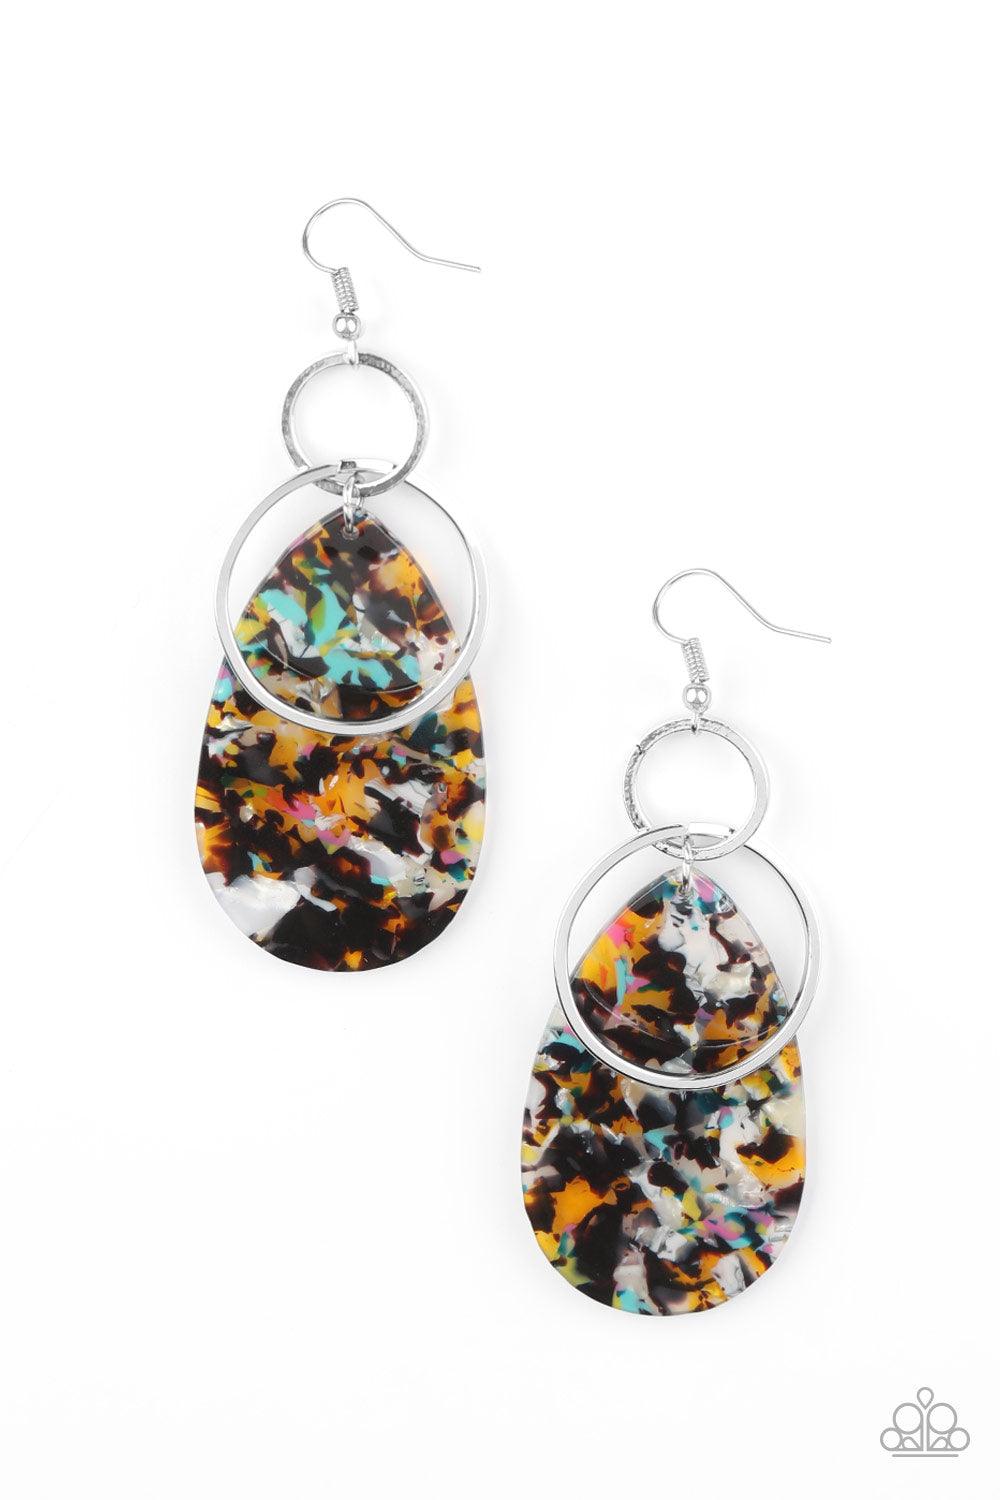 Paparazzi Accessories Two Tickets To Paradise - Multi Featuring an iridescent faux marble finish, a teardrop acrylic frame joins a shiny silver hoop at the bottom of a dainty silver ring, creating a colorful lure. Earring attaches to a standard fishhook f